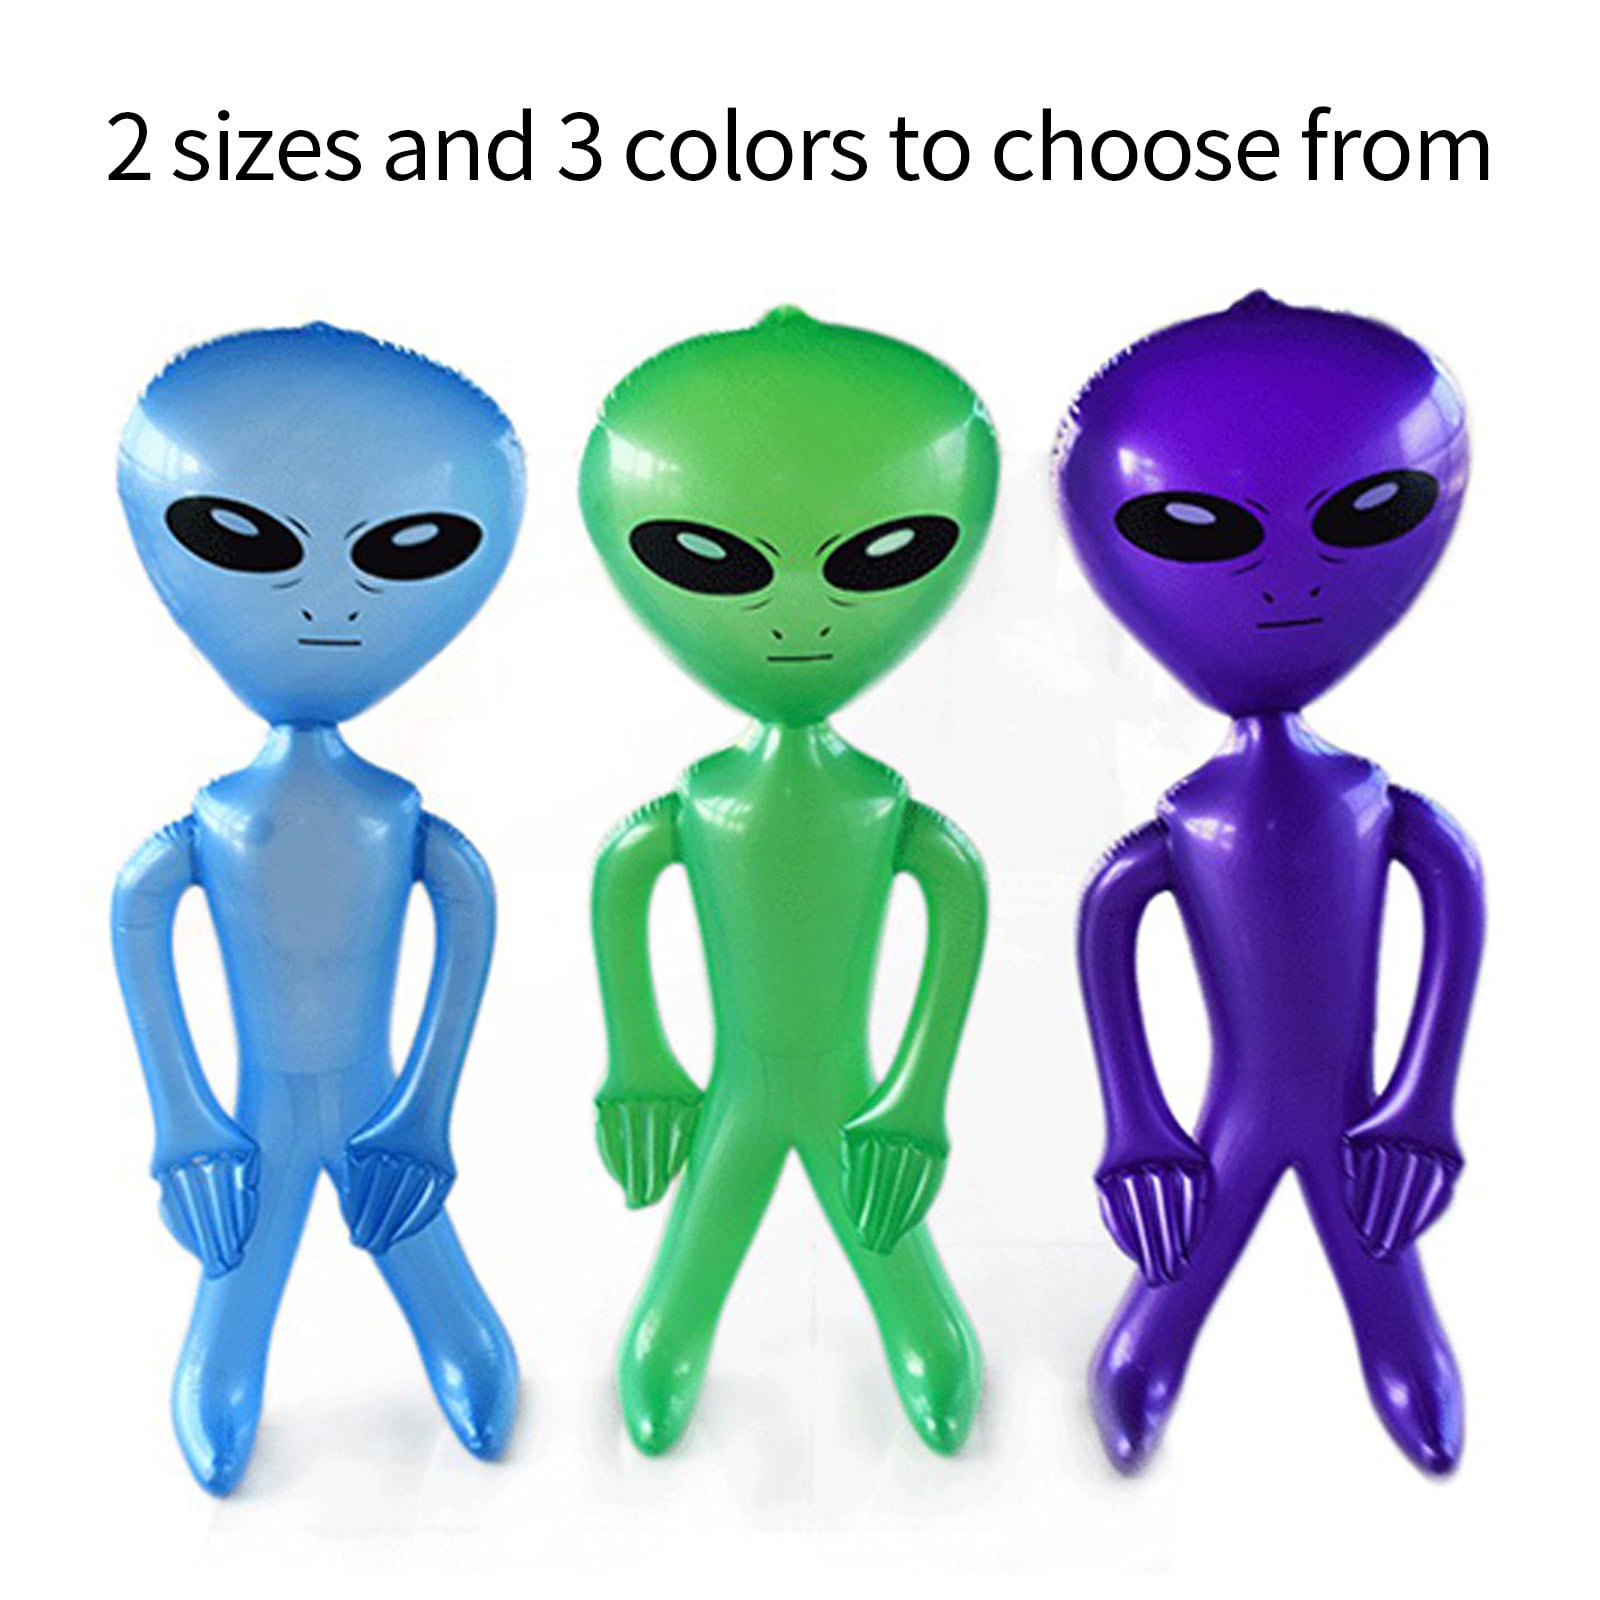 ALIEN INFLATABLE 40 INCH GREEN  BLOWUP INFLATE TOY NEW 